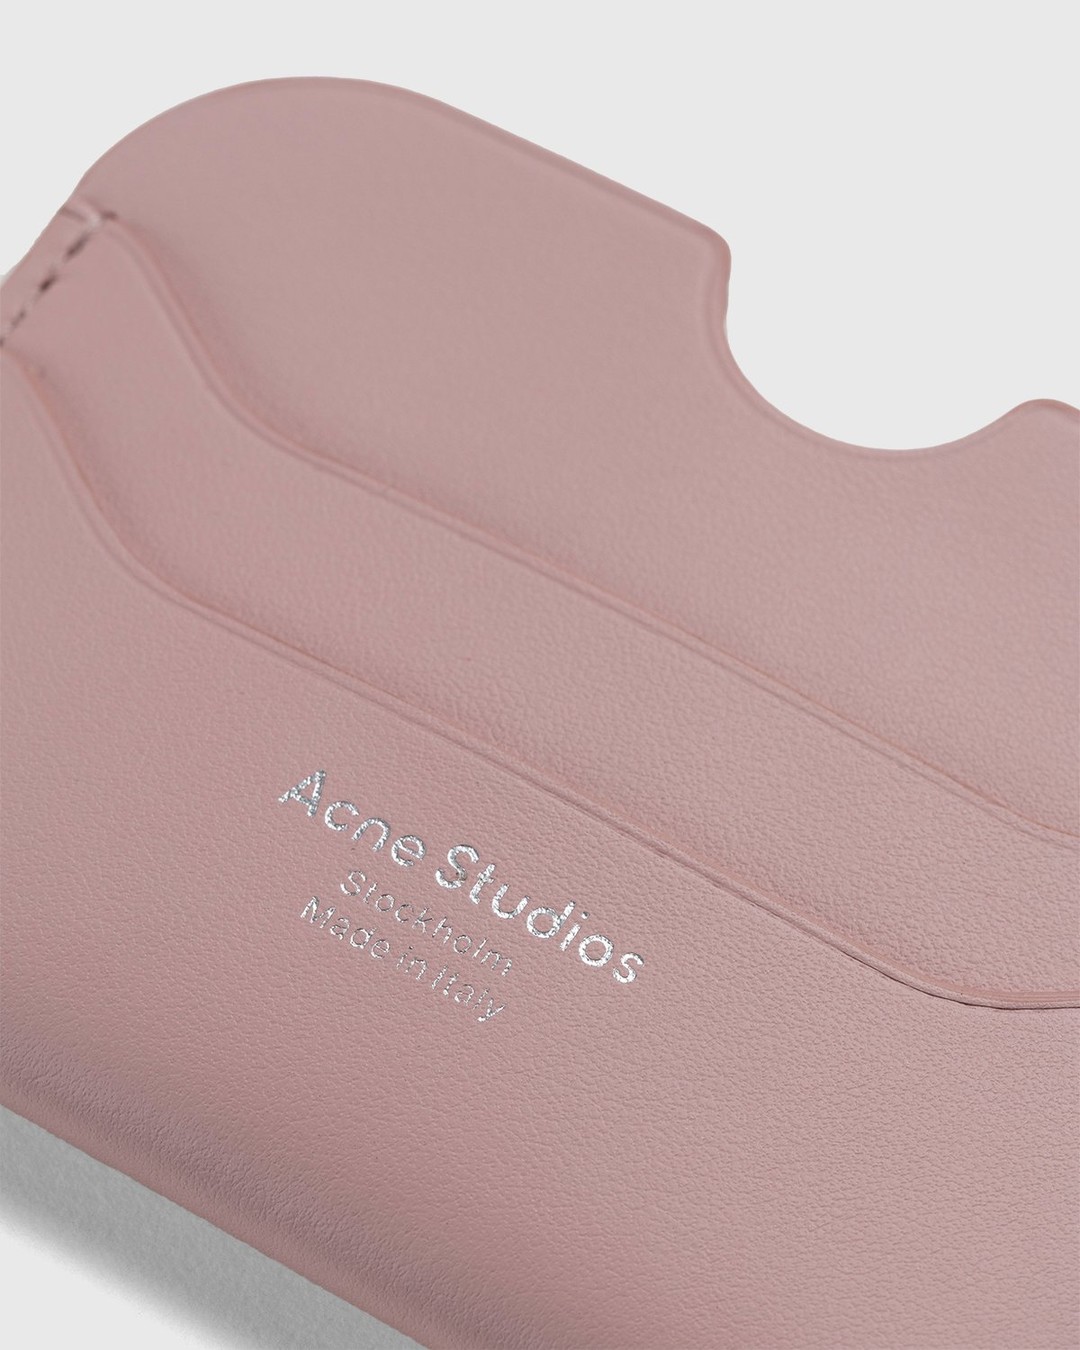 Acne Studios – Leather Card Case Powder Pink - Card Holders - Pink - Image 3